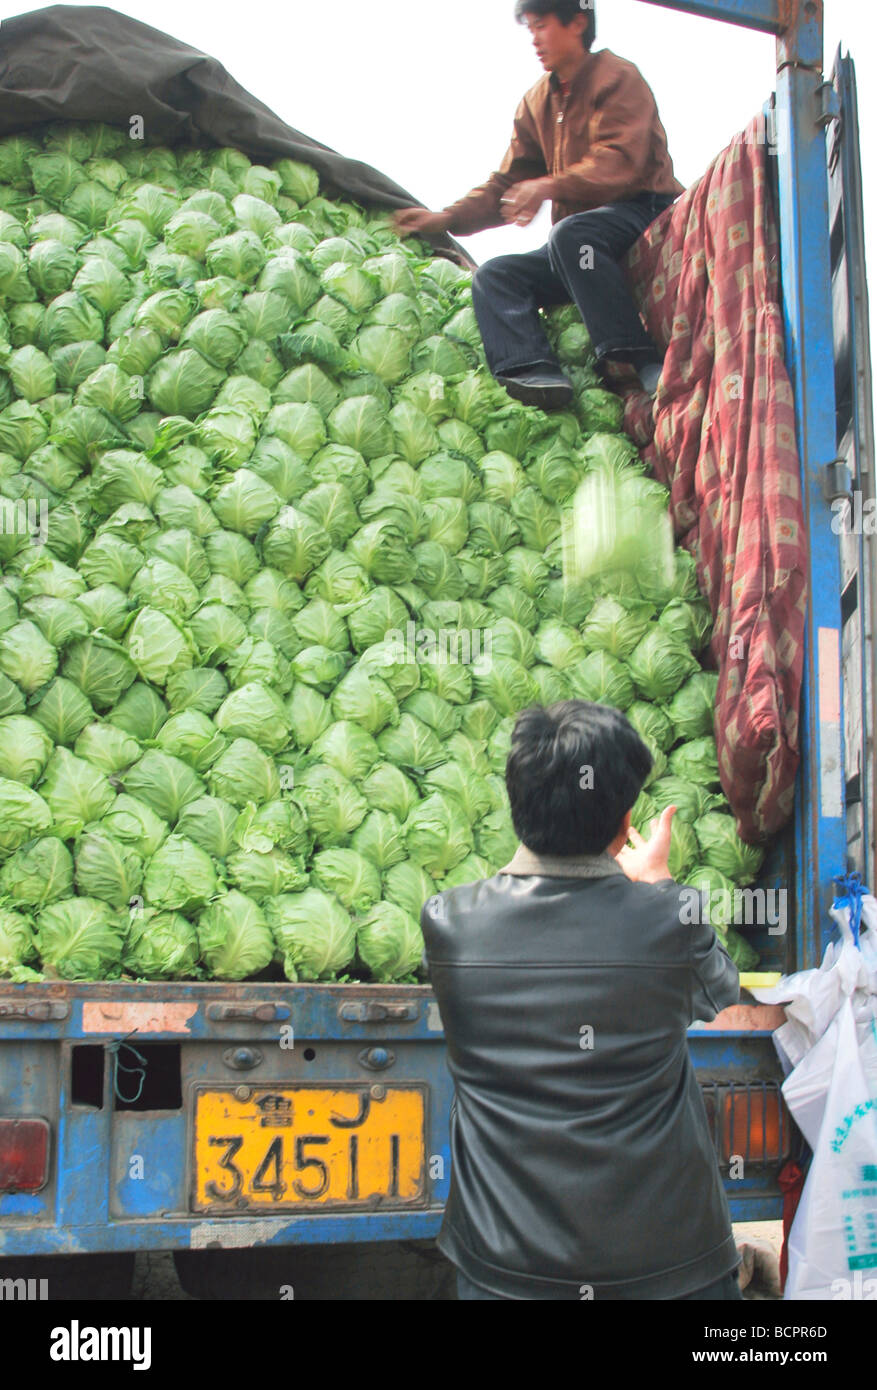 Two shippers unloading cabbages from truck, Beijing, China Stock Photo